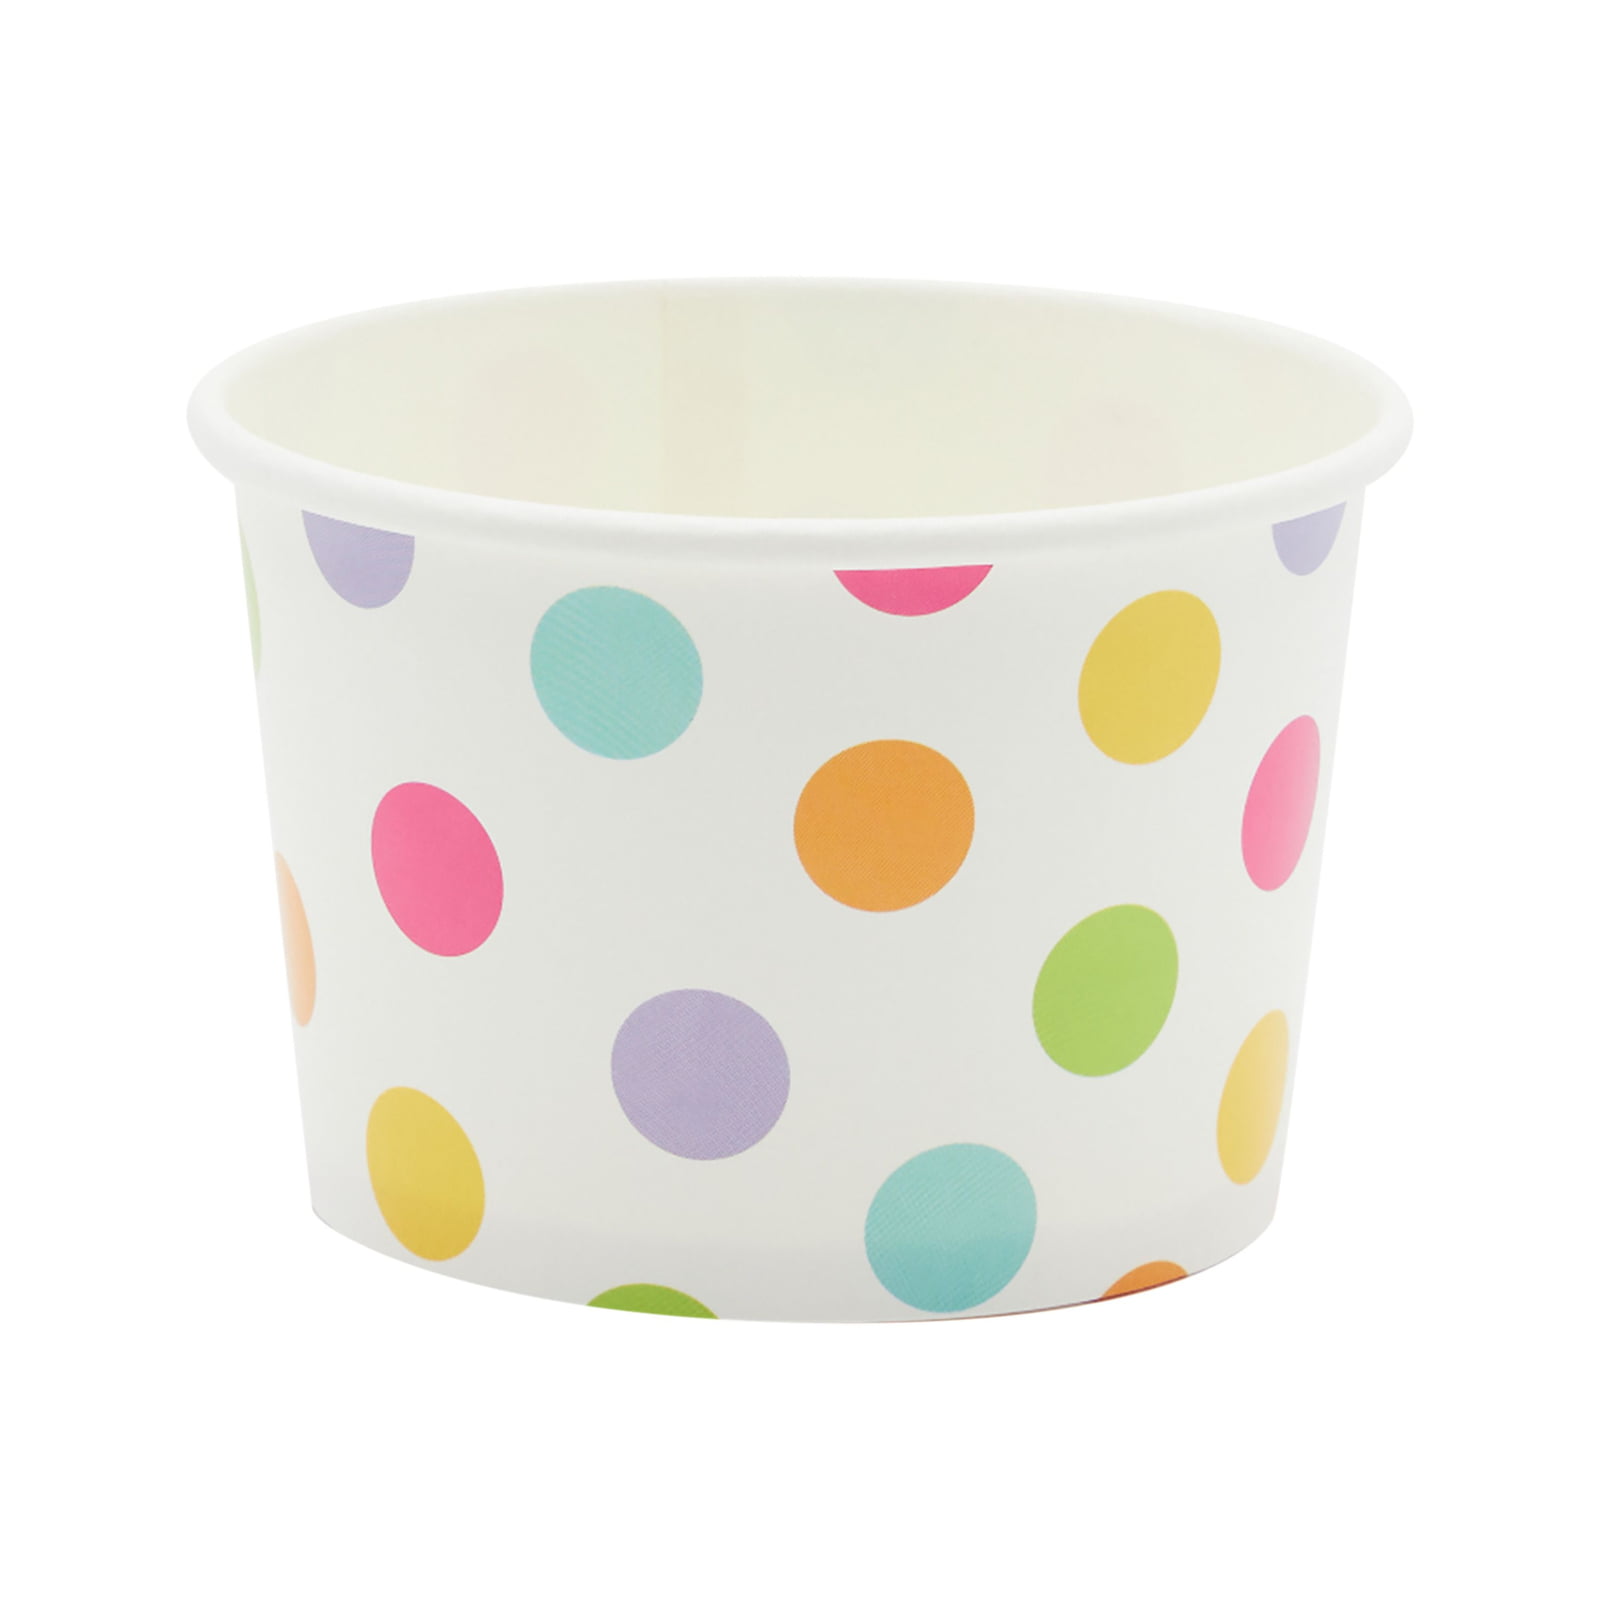 6 Polka Dot oz Disposable Birthday Party Cups Blue Ice Cream Paper Cups 